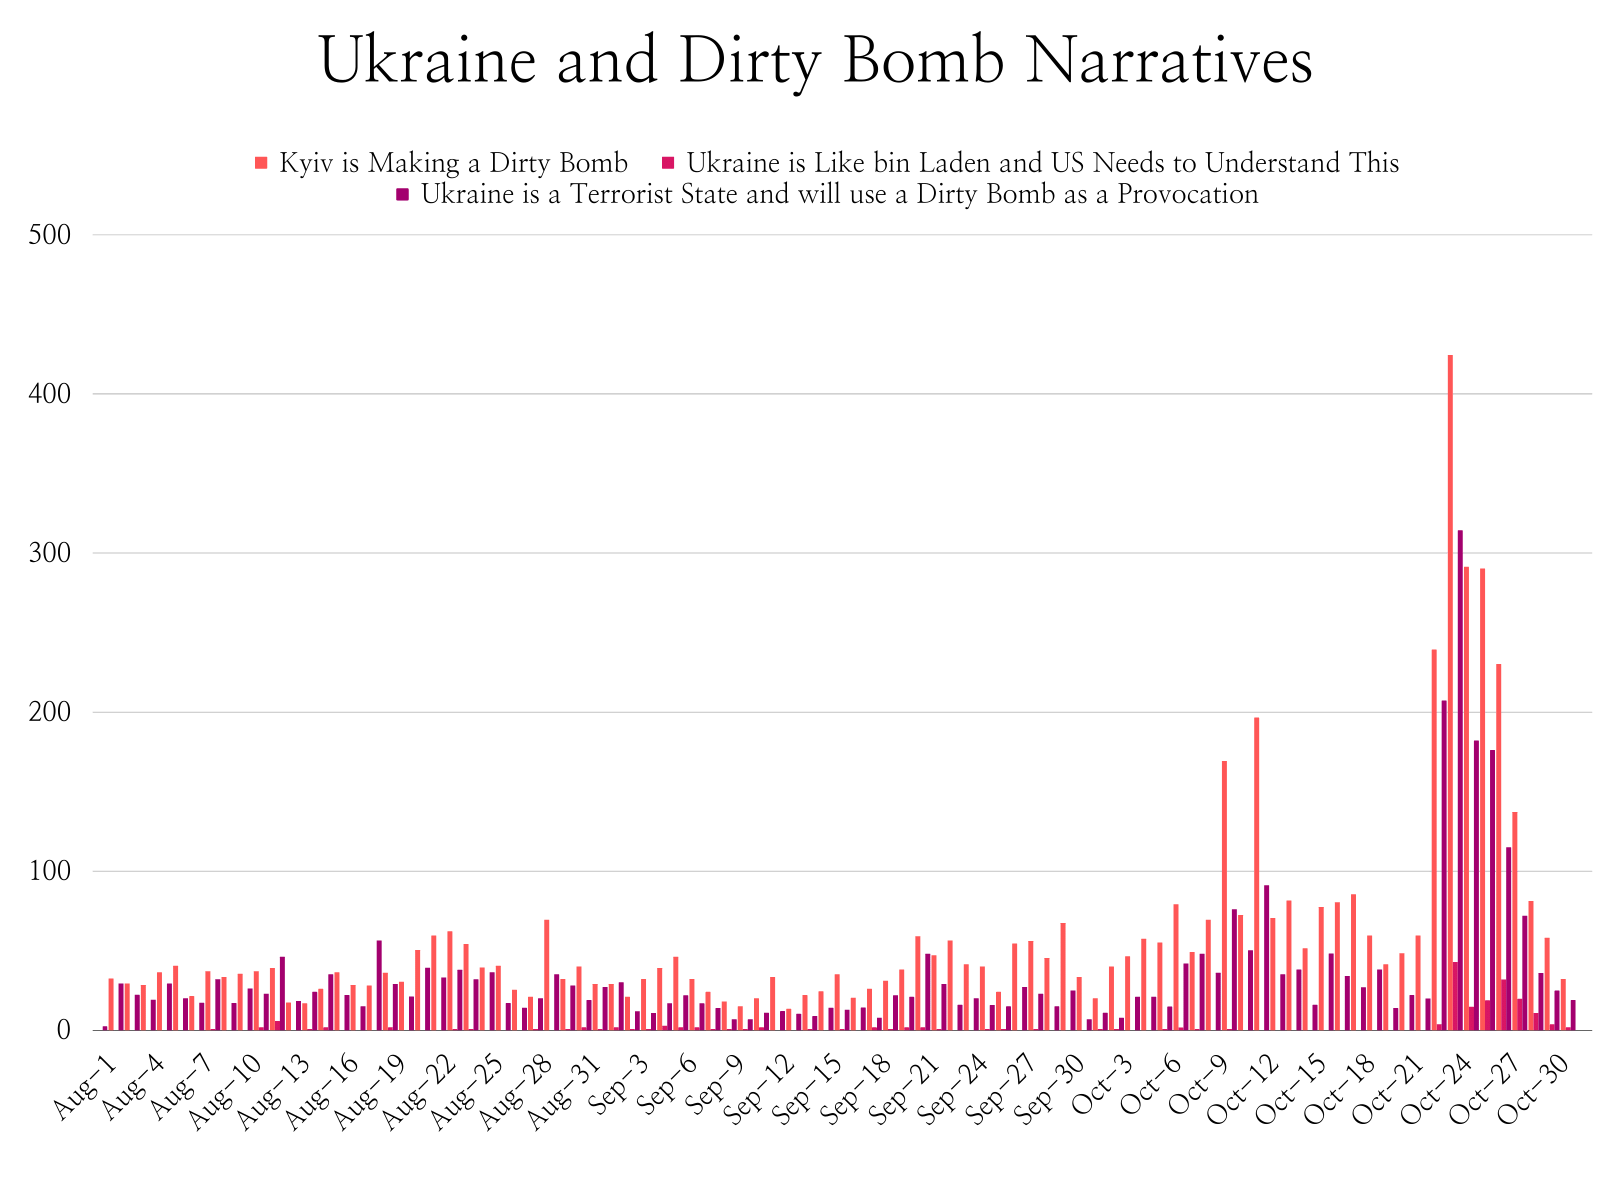 Bar chart showing volume of narratives around Ukraine and dirty bomb, bin Laden and Terrorist state activity. There is a massive increase around October 22.